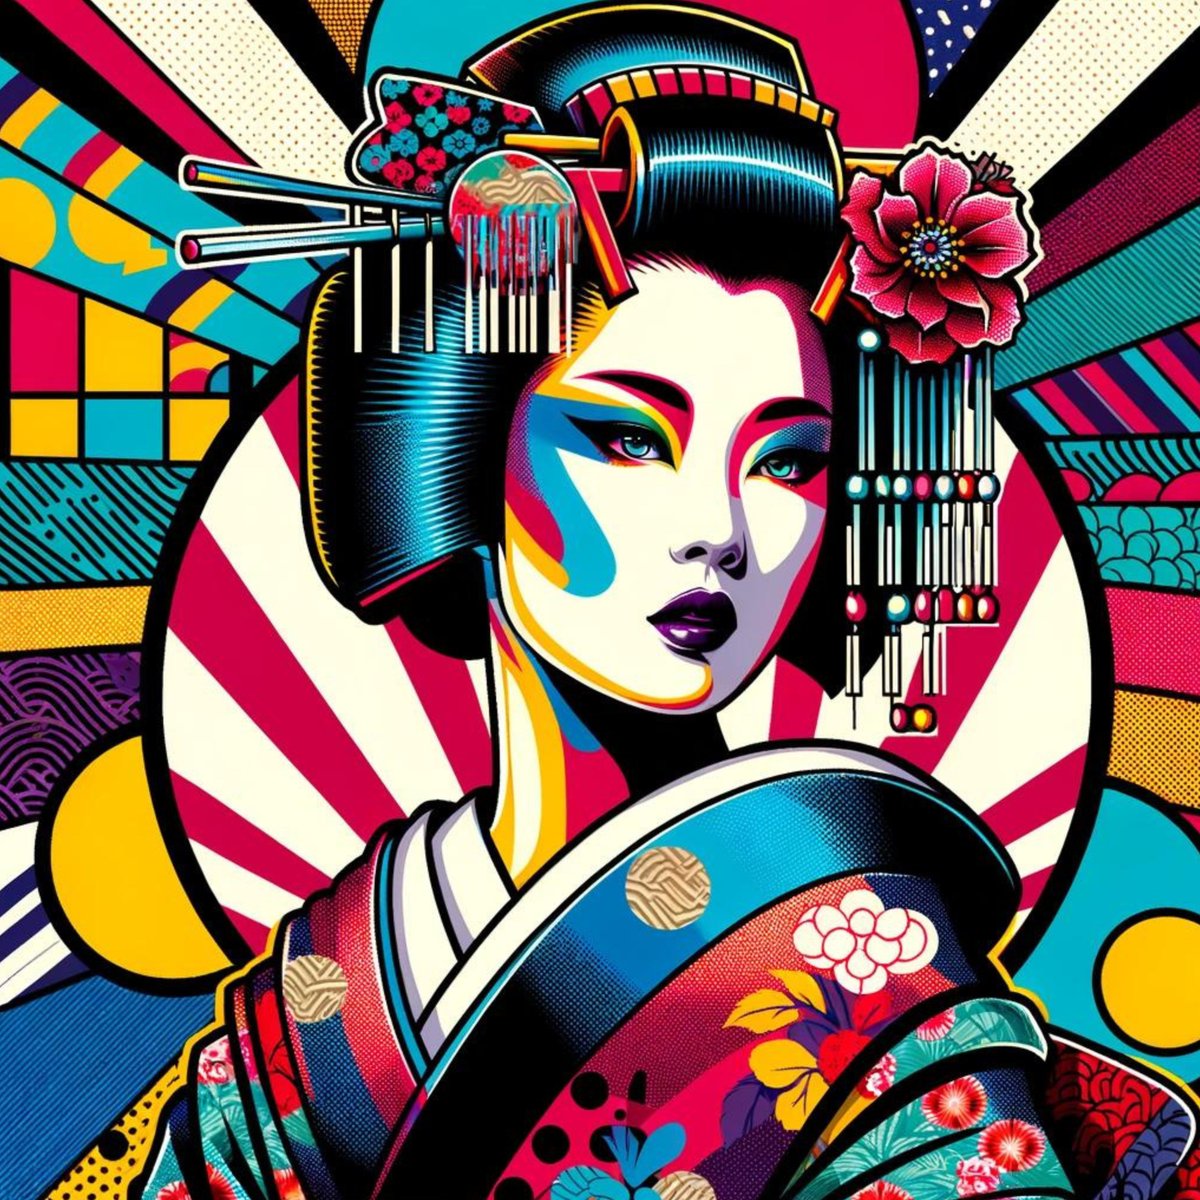 A tapestry of 'Pop' hues heralds a new era of beauty🌈✨. True elegance dwells within both revered traditions and bold innovations. Wrap yourself in the artistic pride of Japan. 
redbubble.com/shop/ap/160592…
#Pop #Colorful #JapaneseDesign #Geisha #Creativity